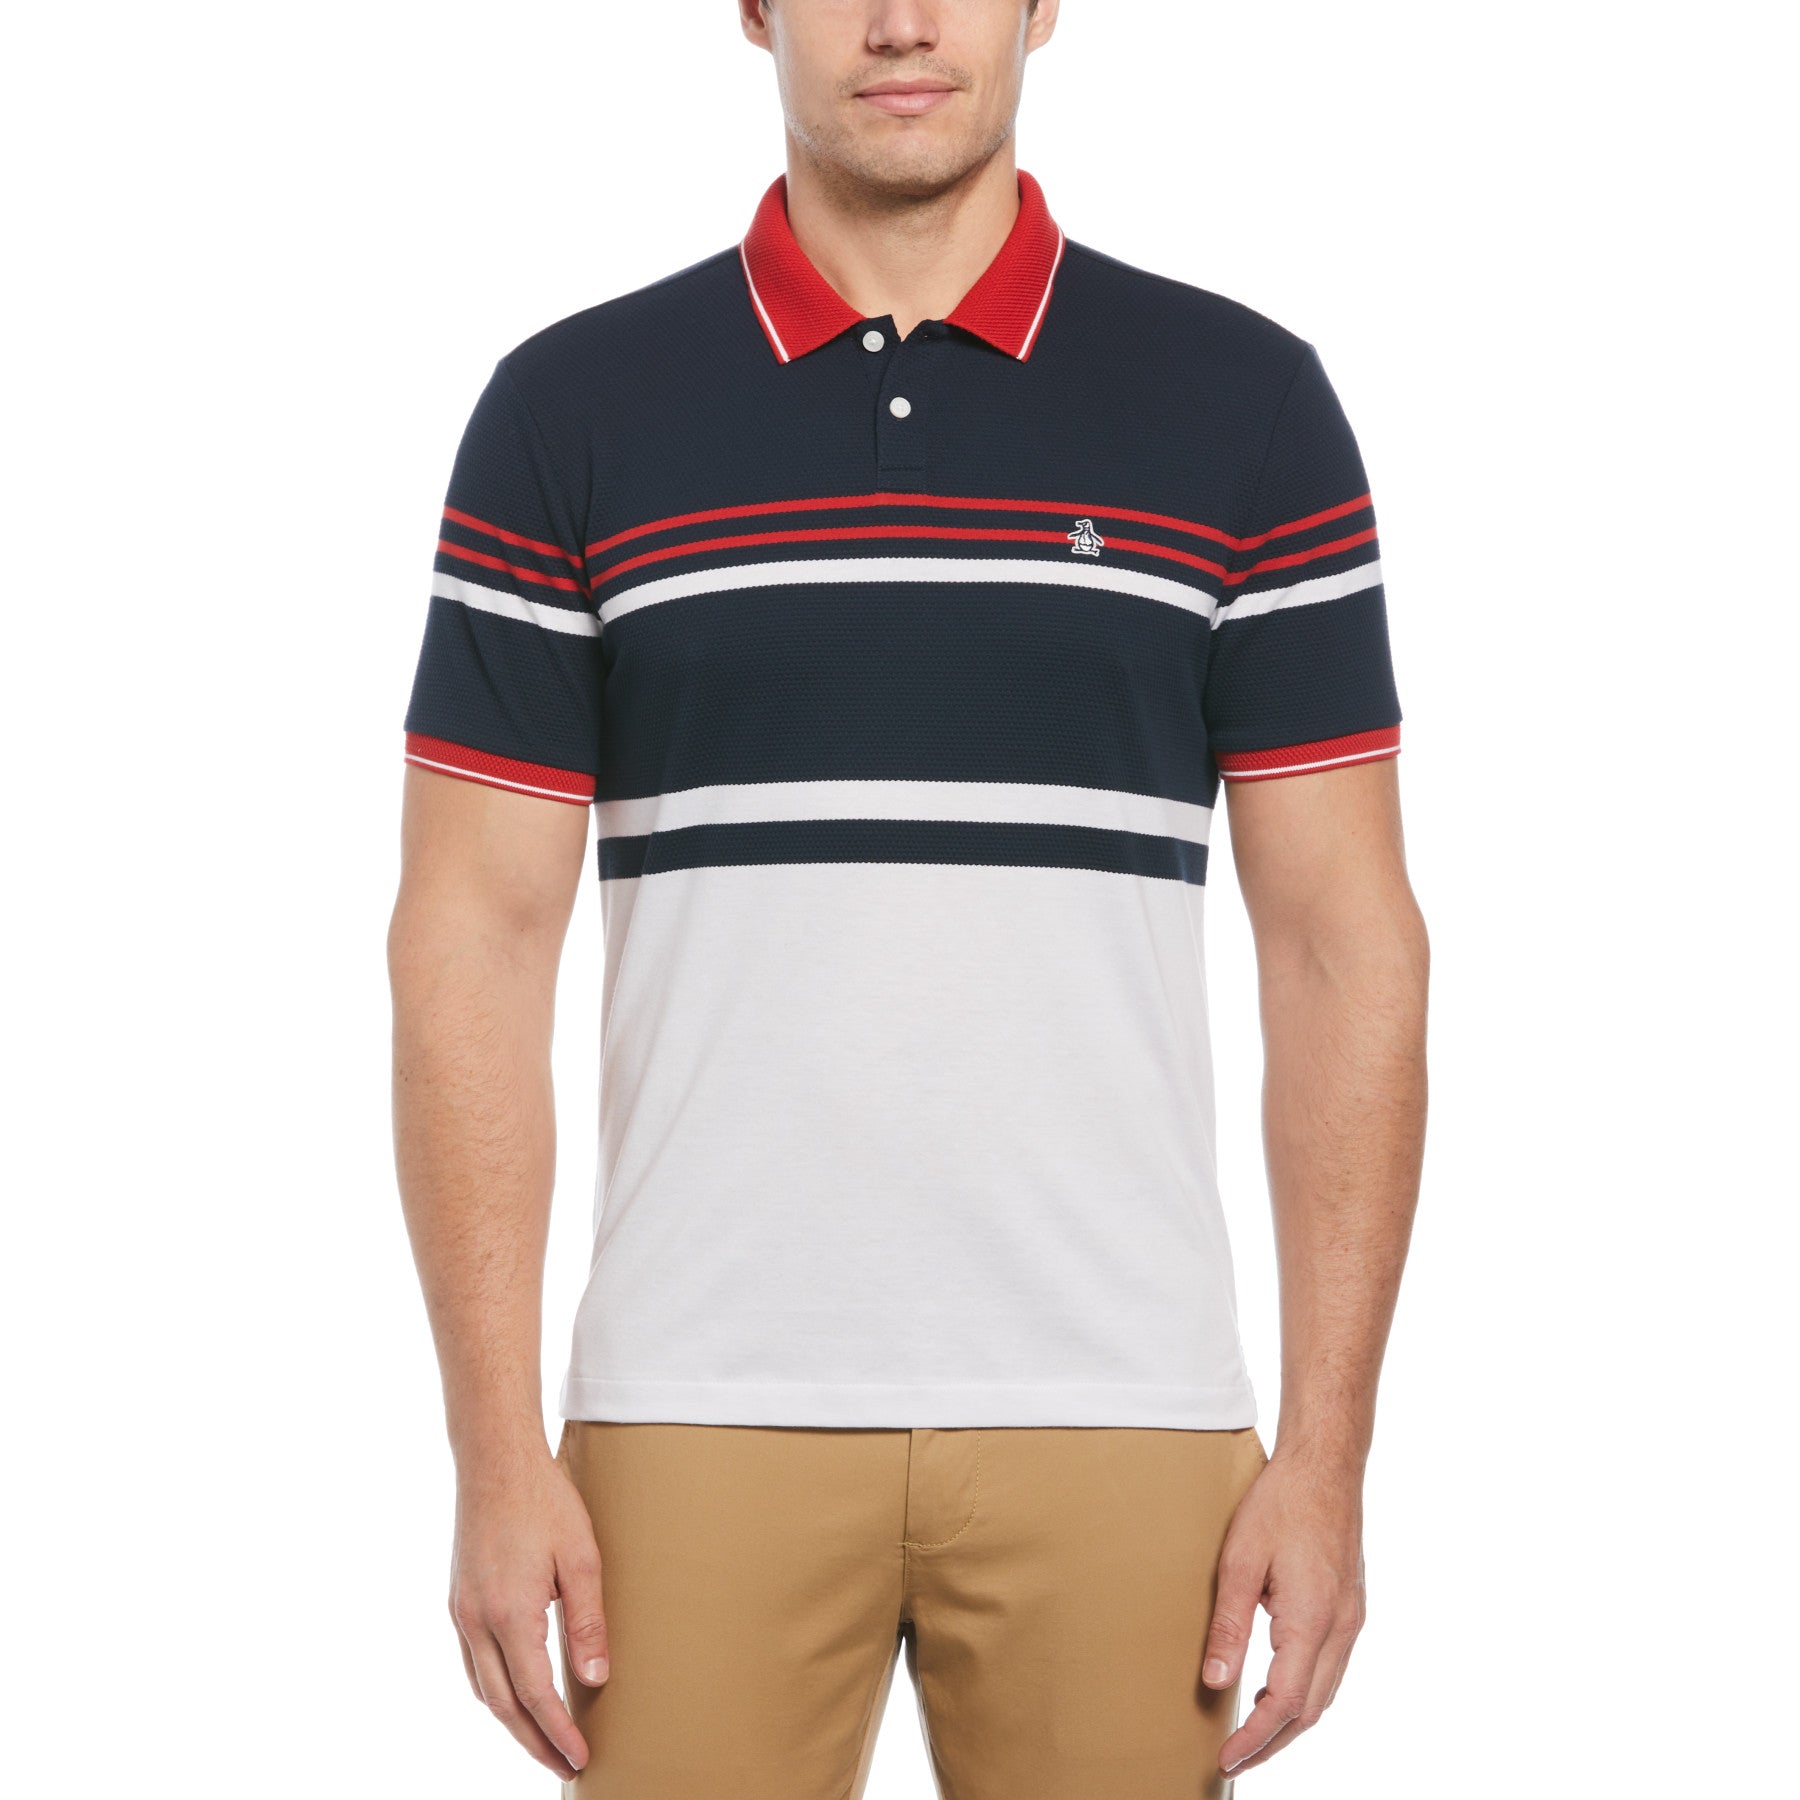 View Jacquard Honeycomb Stripe Pattern Short Sleeve Polo Shirt In Bright Wh information